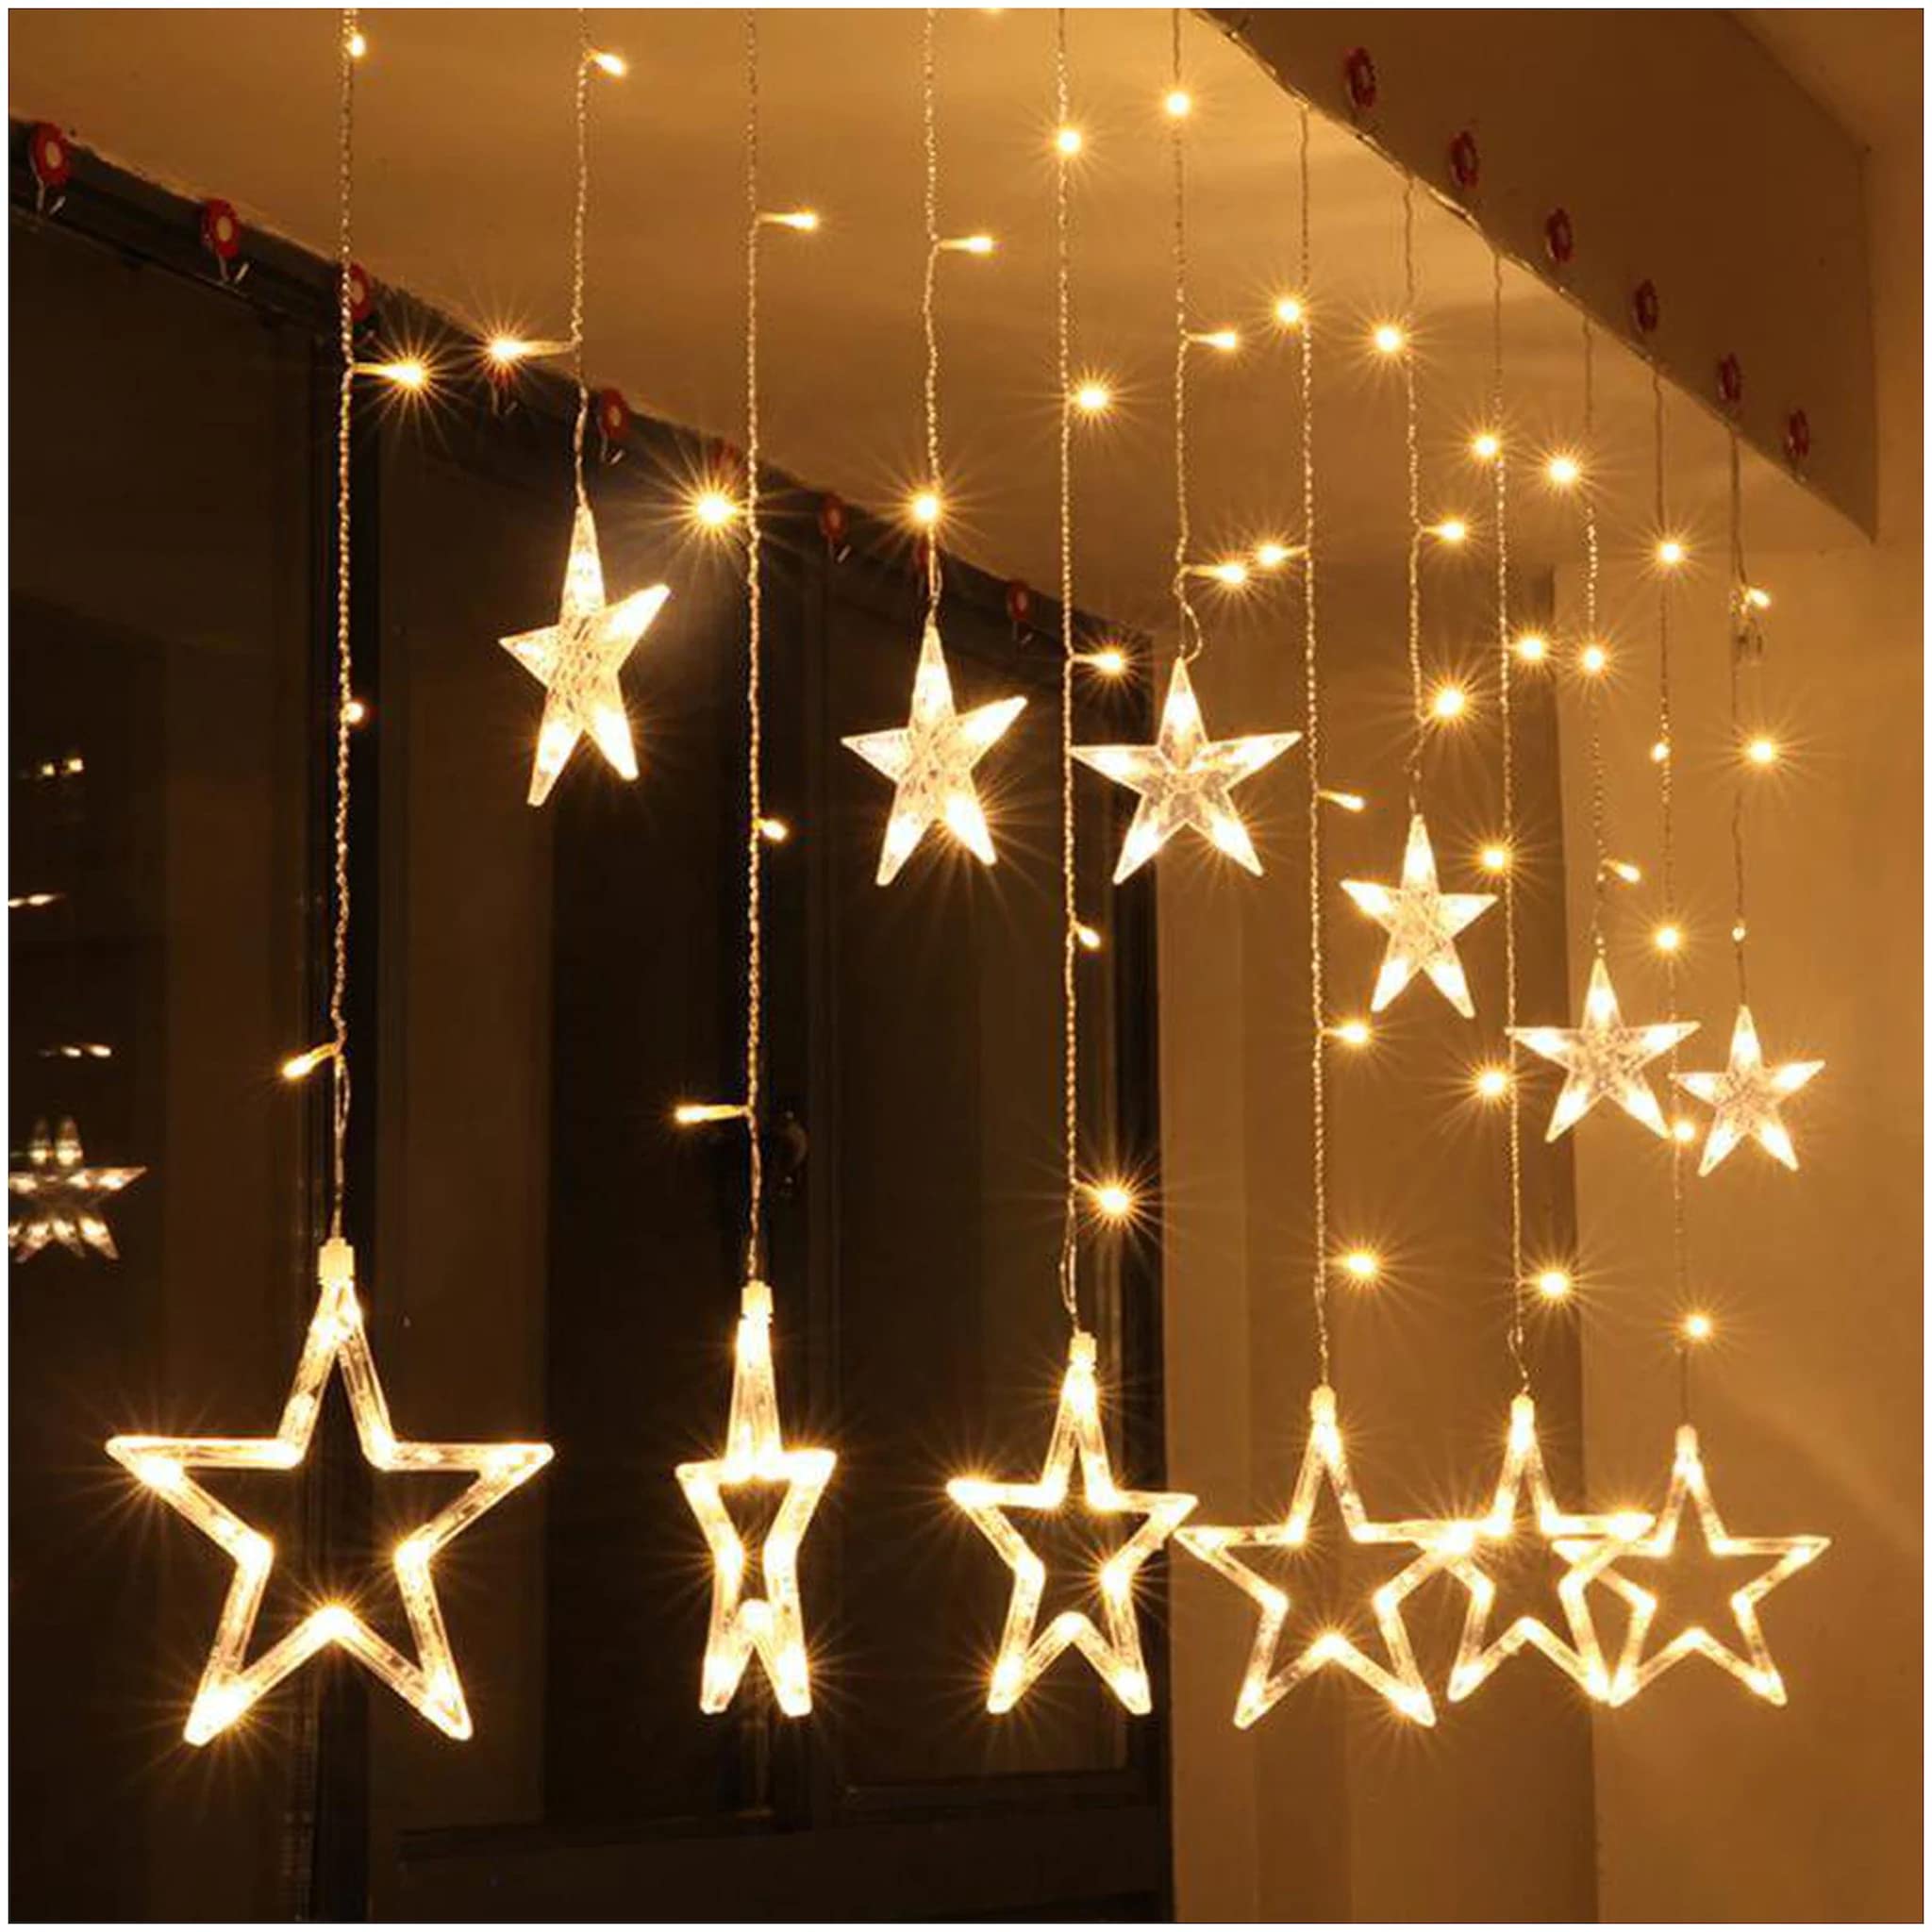 F C Fancy Creation Decorative Star Curtain LED Lights for Christmas, Wedding - 2.5 Meter (1 Curtain, 138 LED, 6+6 Star), Christmas Light Curtain, Christmas Star Lights, Best Gift for Christmas